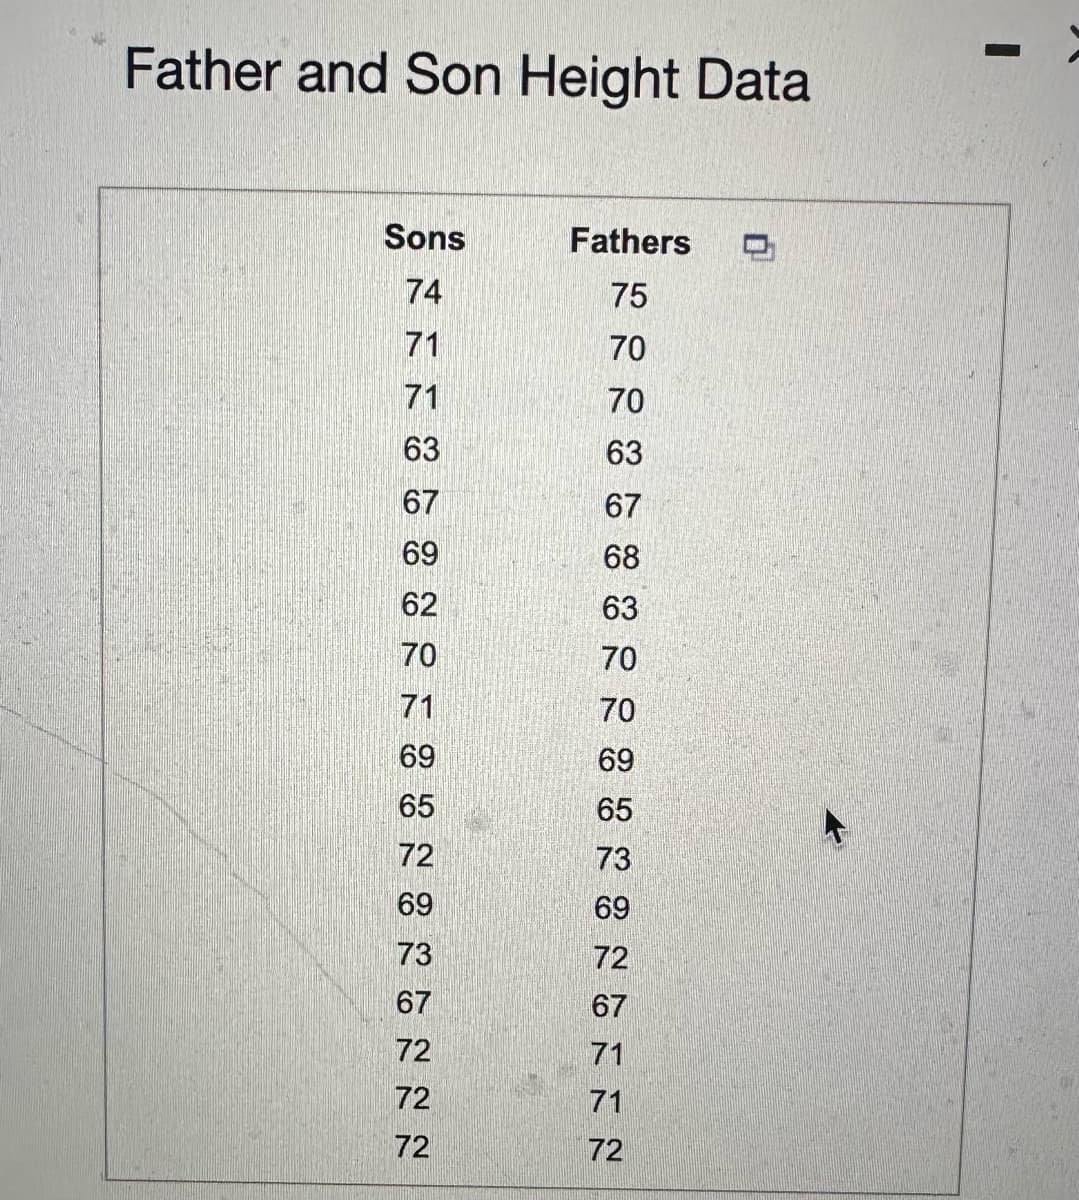 Father and Son Height Data
0
Sons
Fathers
74
75
71
70
71
70
63
63
67
67
69
68
62
63
70
70
71
70
69
69
65
65
72
73
69
69
73
72
67
67
72
71
72
71
72
72